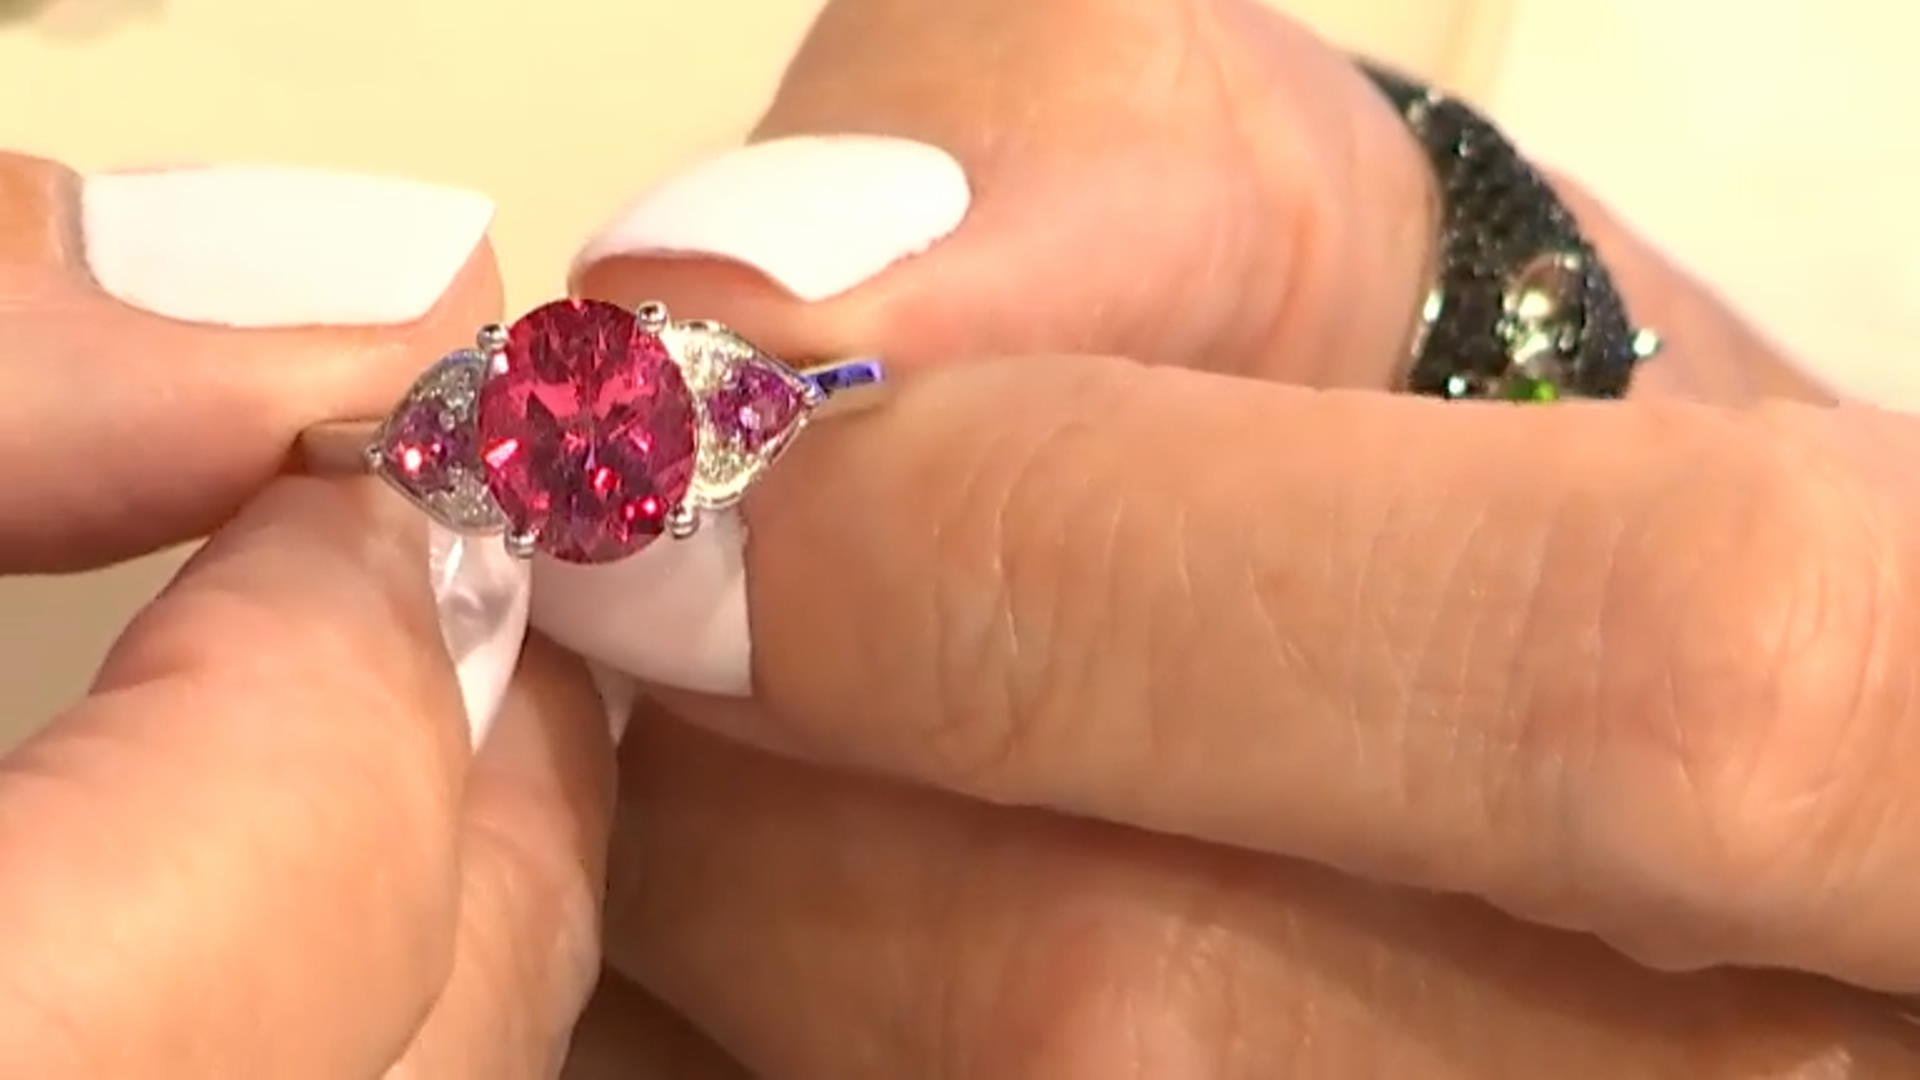 Pink Mexican Danburite Rhodium Over Sterling Silver Ring 2.37ctw Video Thumbnail